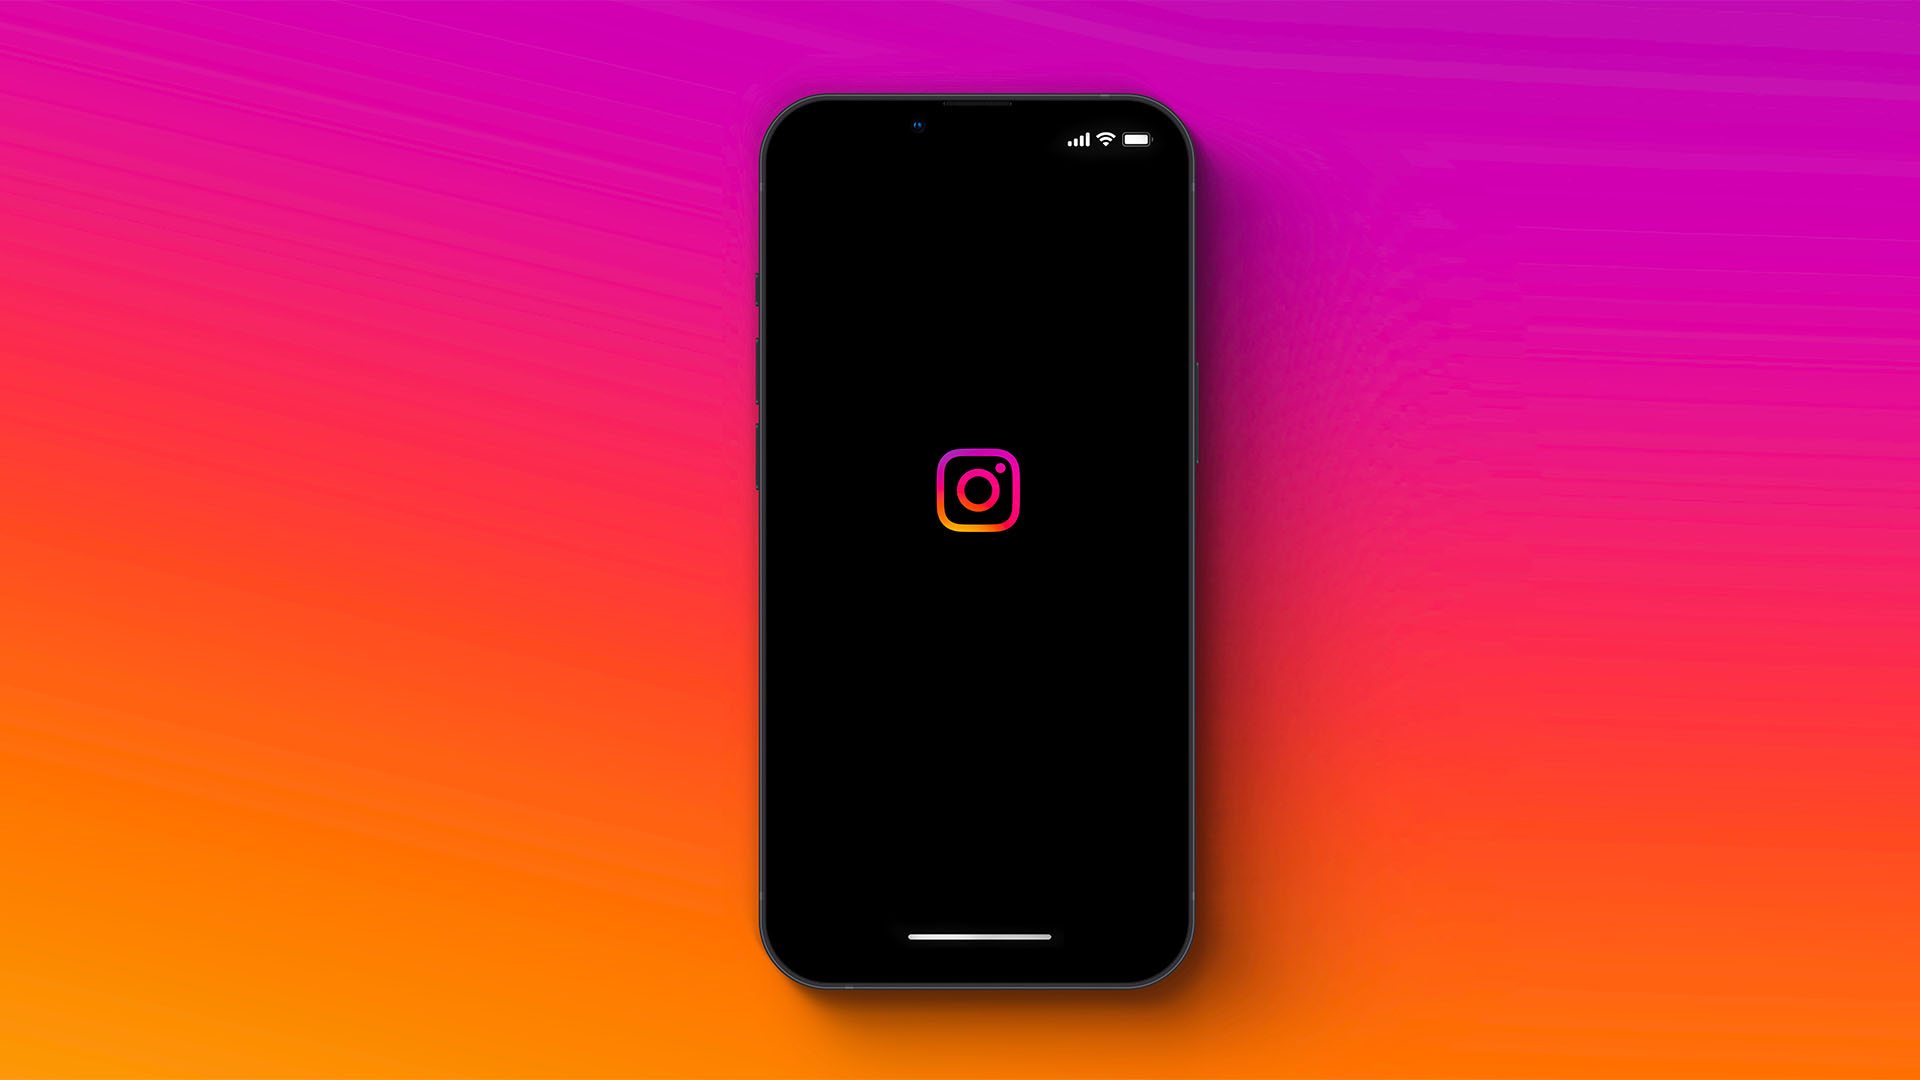 Phone in front of orange and purple gradient background. Its screen is completely black featuring the Instagram logo.